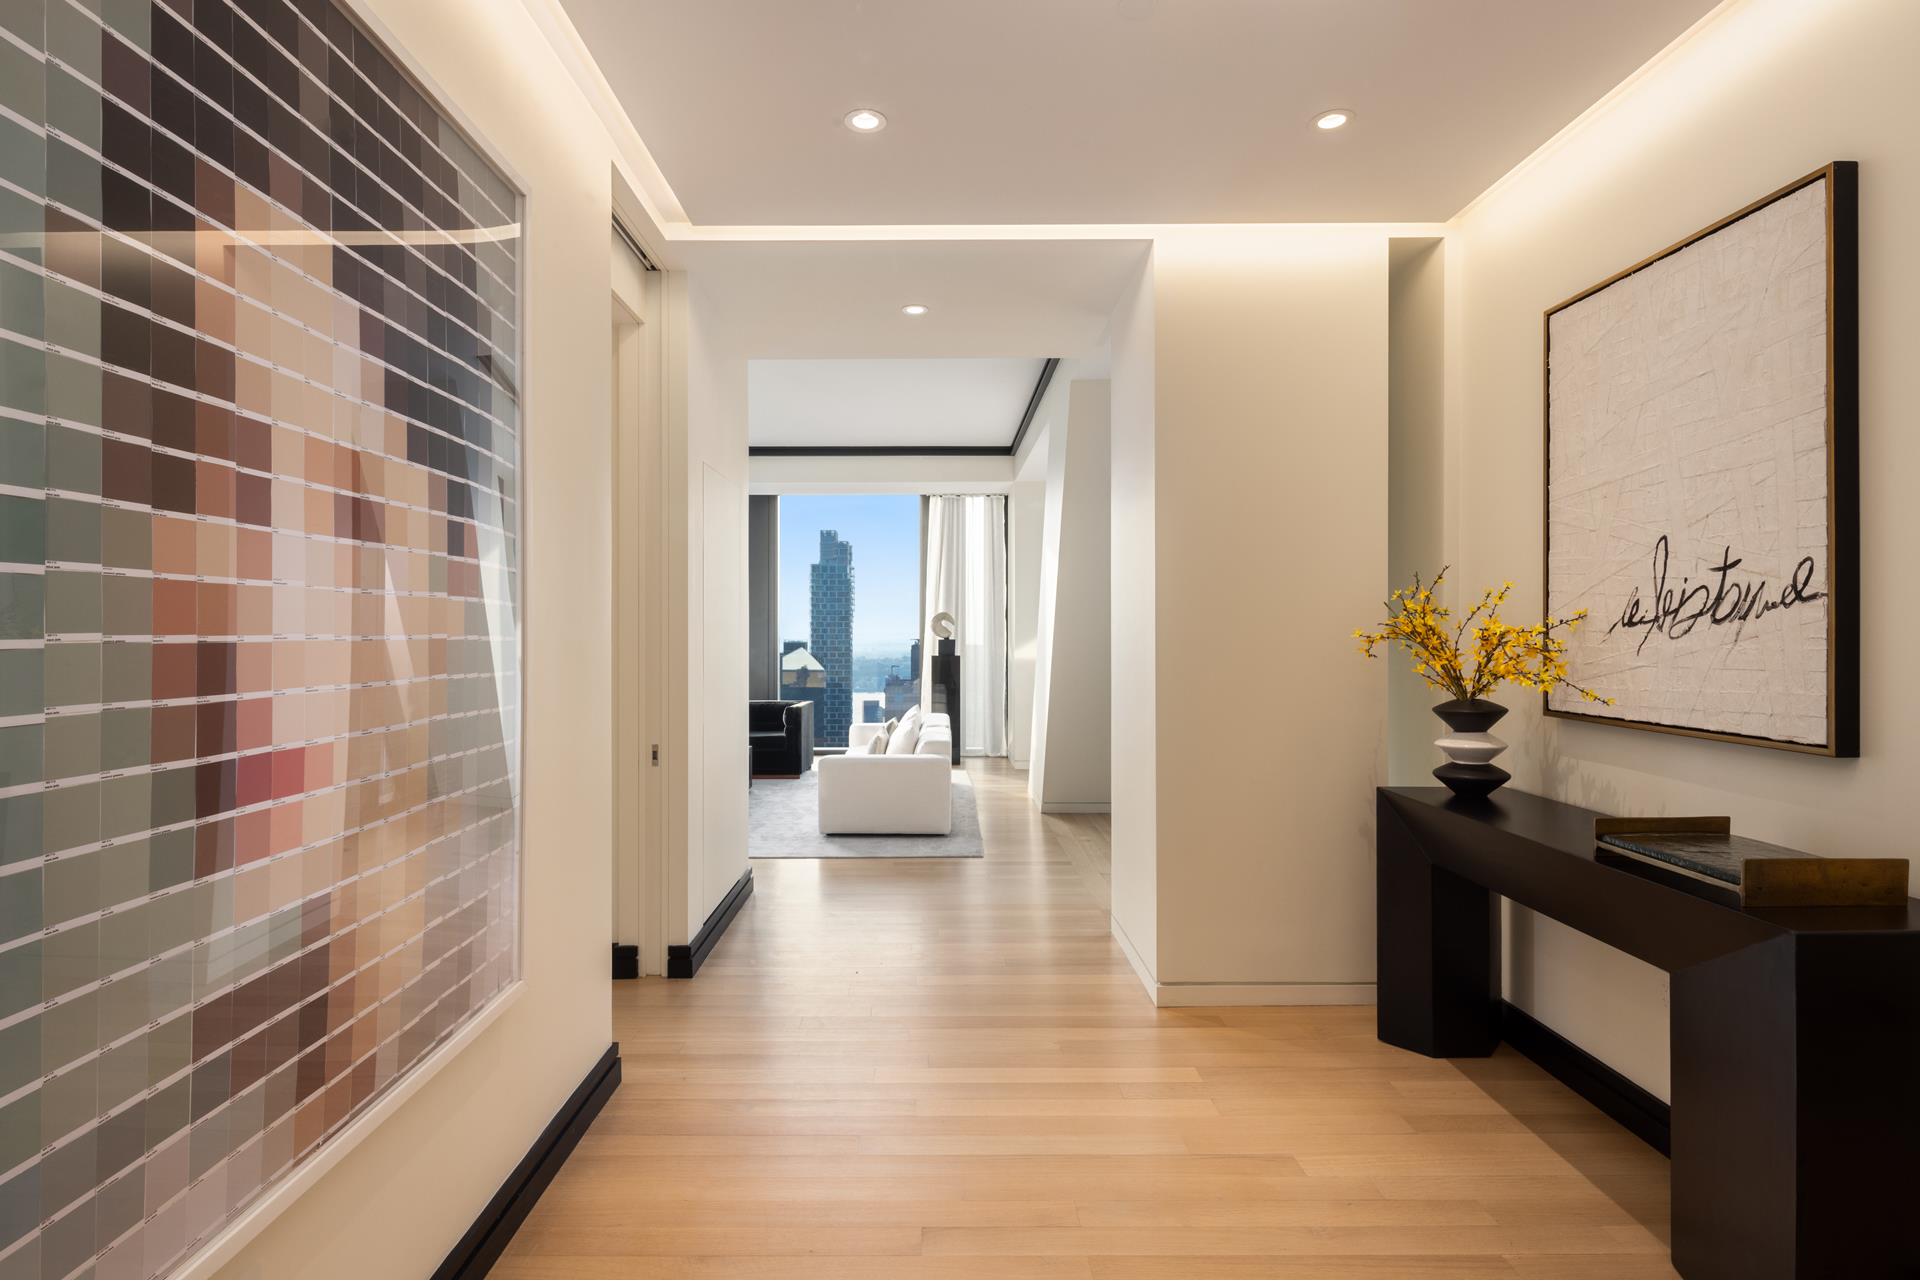 53 West 53rd Street 60B, Chelsea And Clinton, Downtown, NYC - 3 Bedrooms  
3.5 Bathrooms  
6 Rooms - 